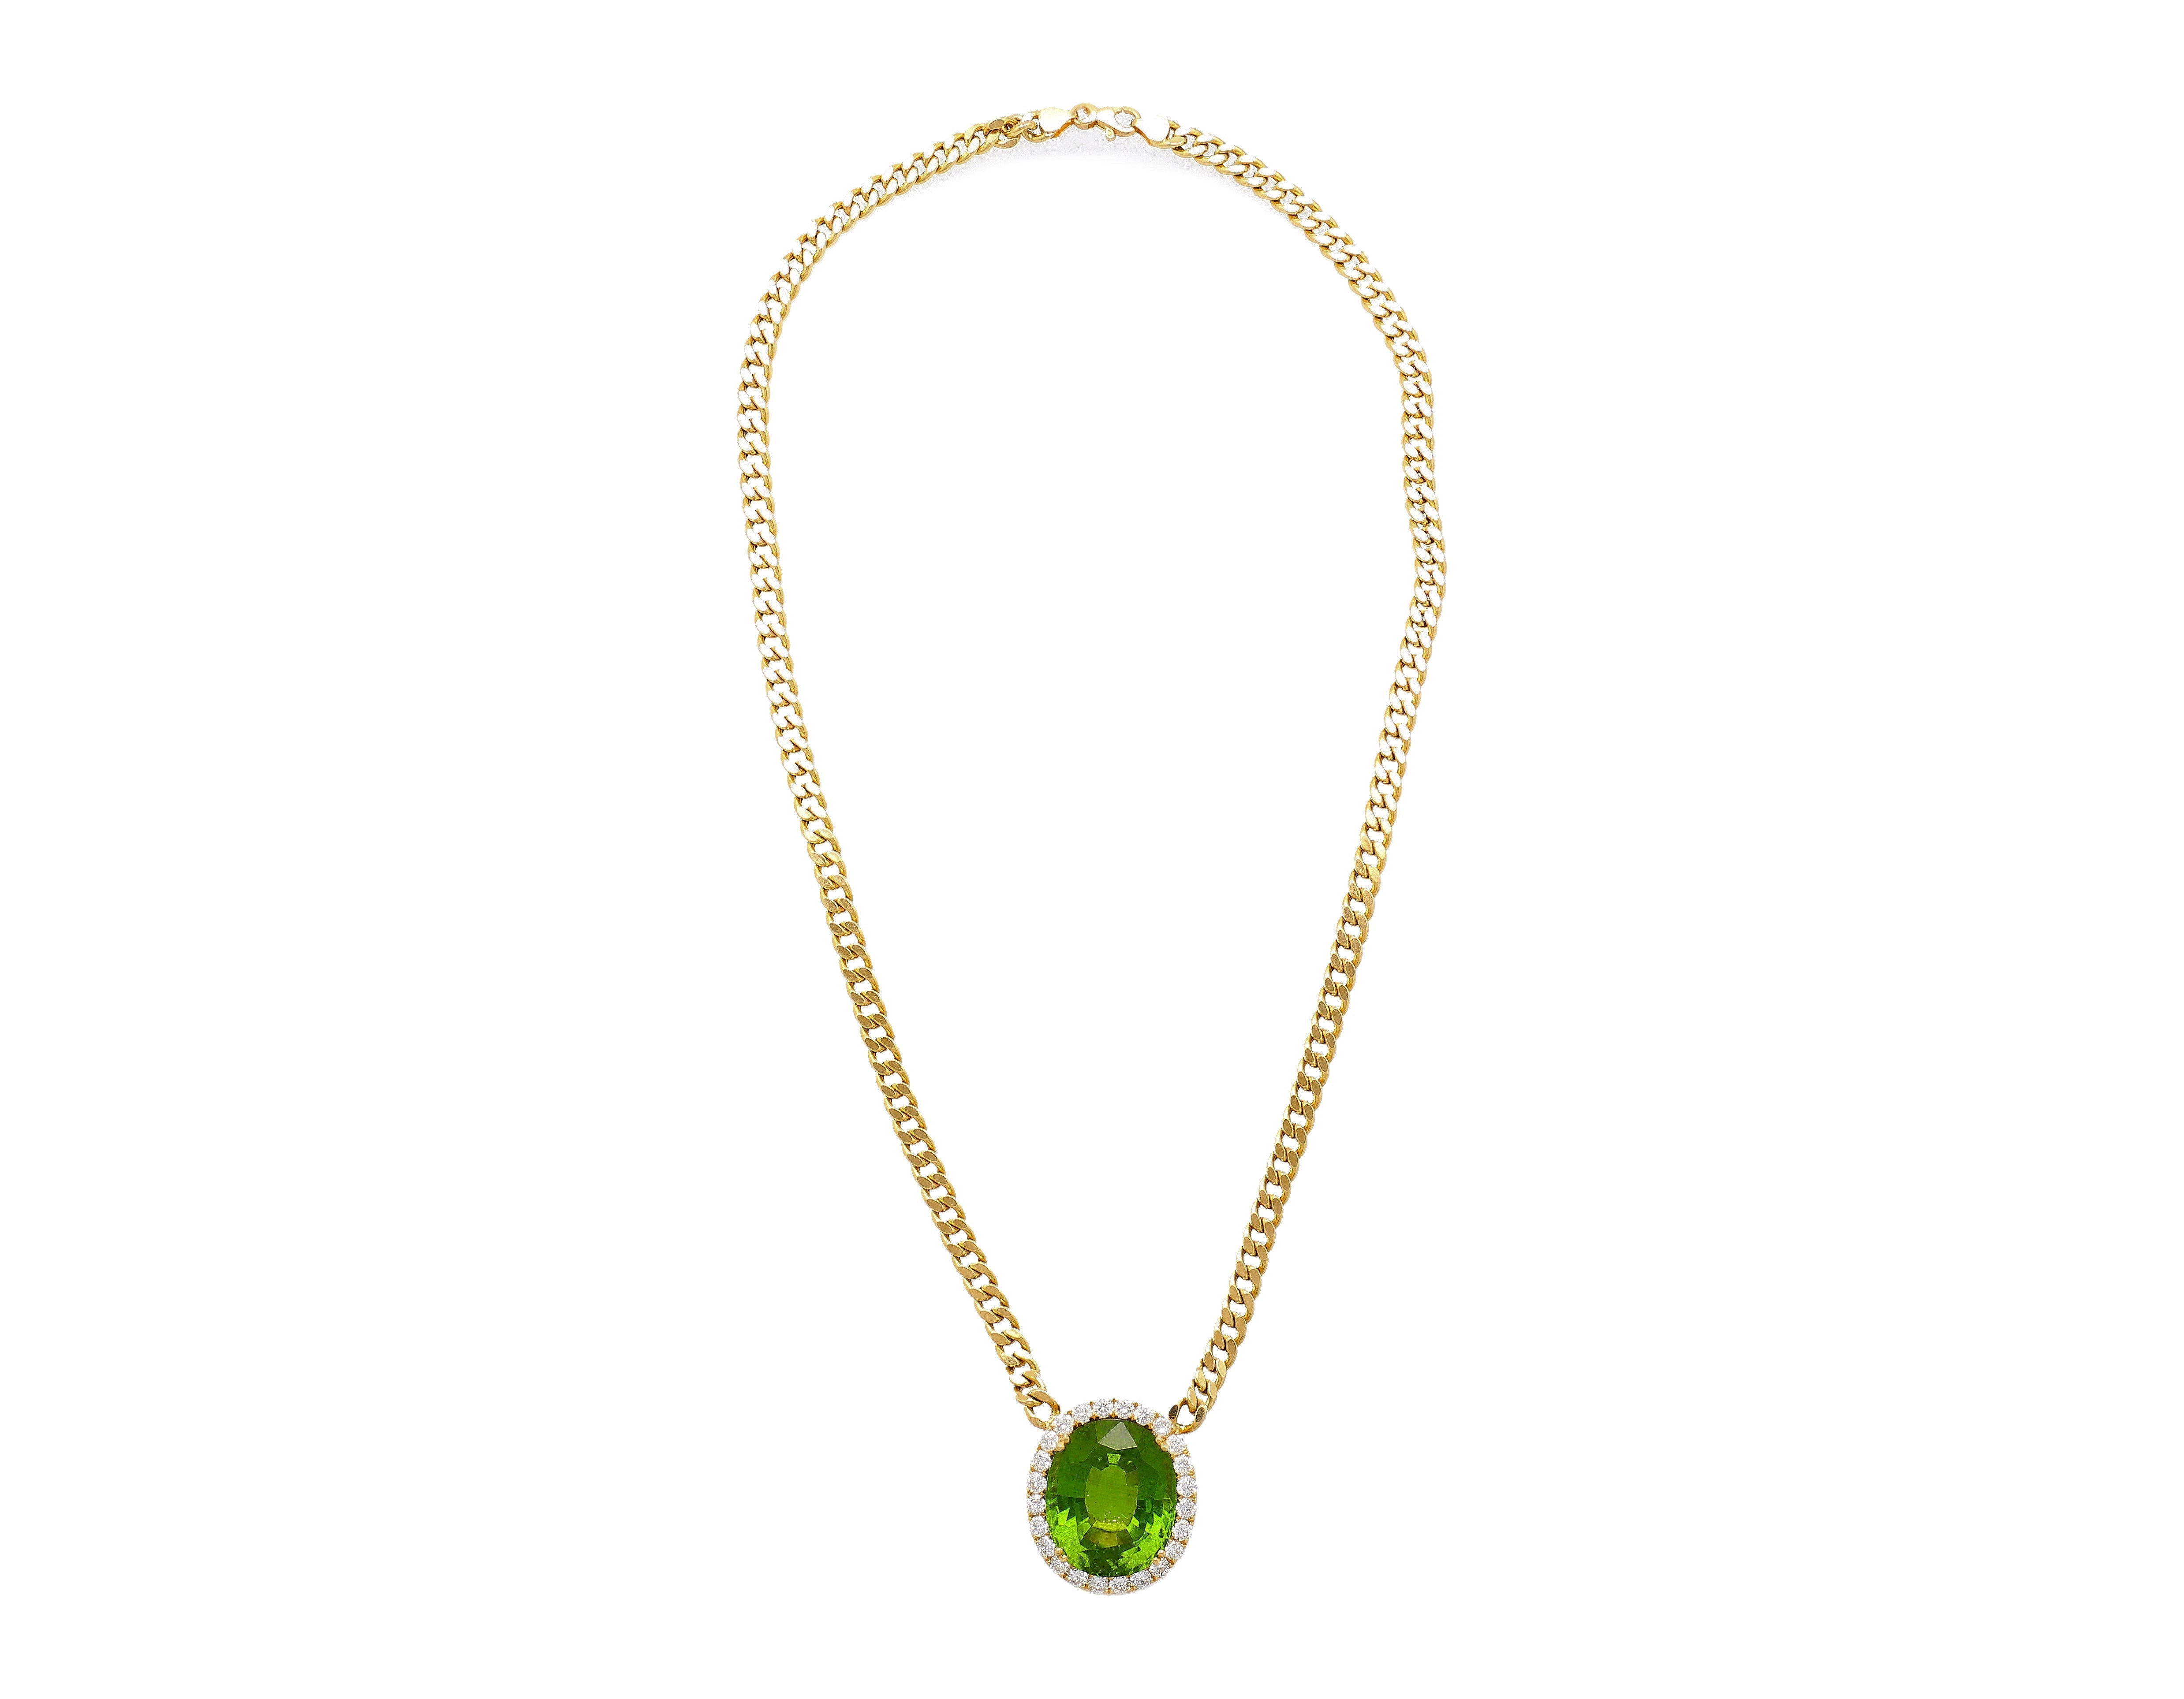 GRS-Certified-51-carat-Green-Oval-Cut-Peridot-with-Diamond-Halo-in-18K-Gold-Cuban-Chain-Setting-Pendant-Necklace-Necklace-2.jpg